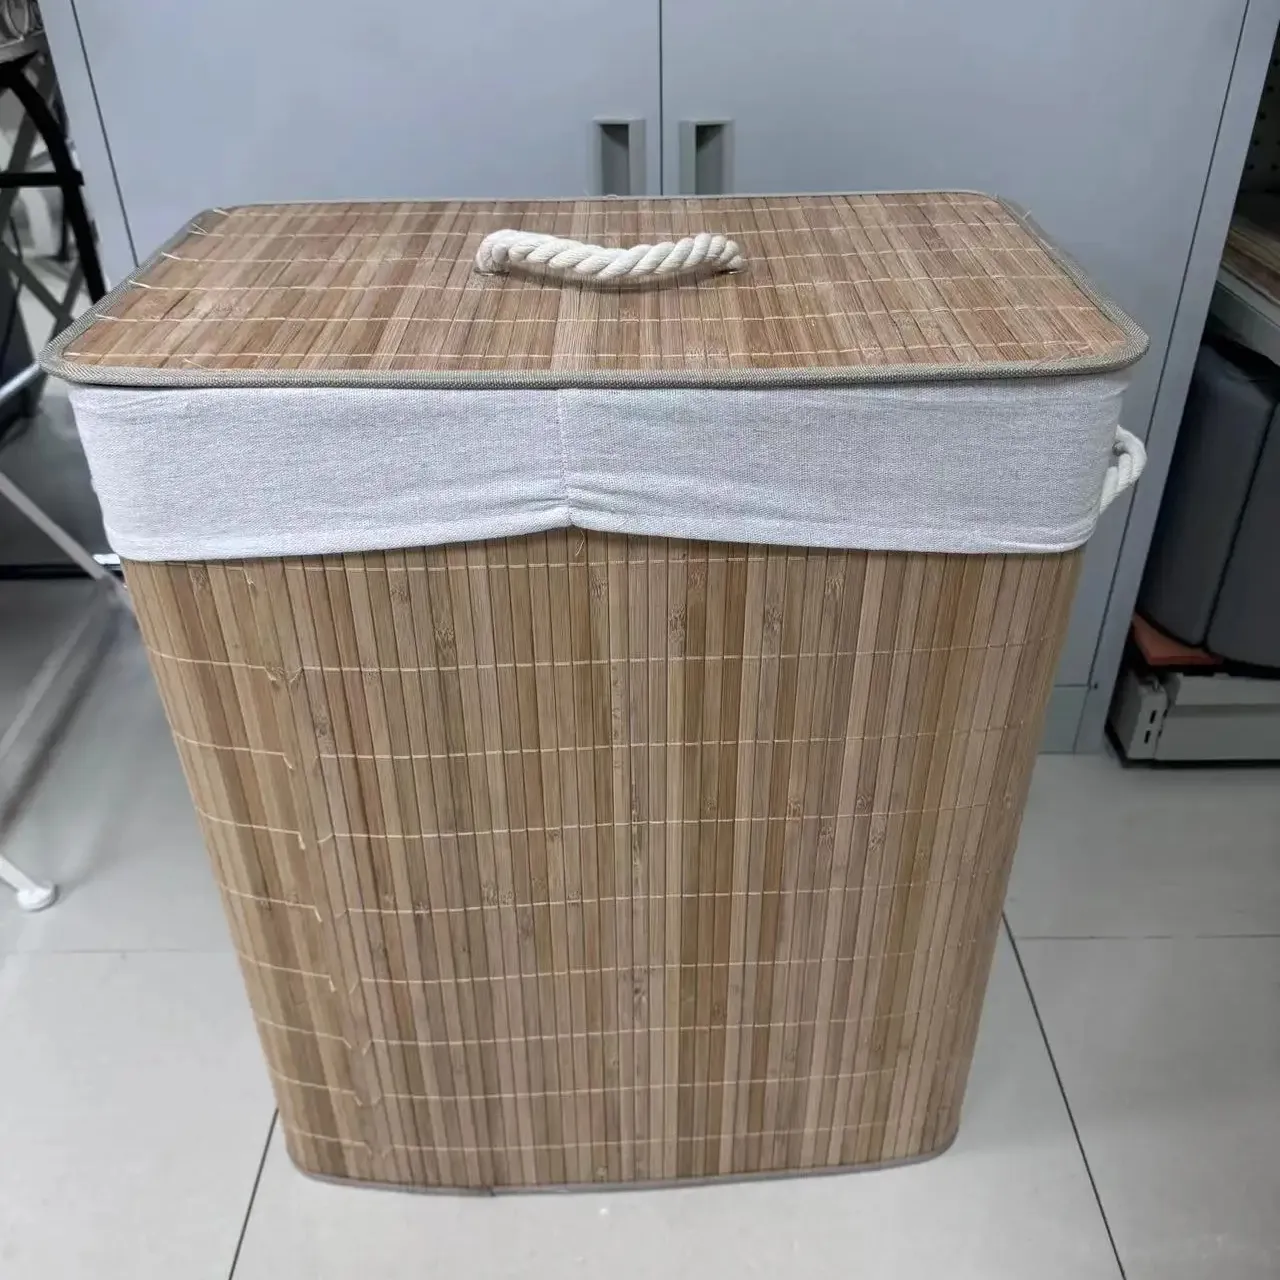 2 Side Bamboo Laundry Basket with Lid